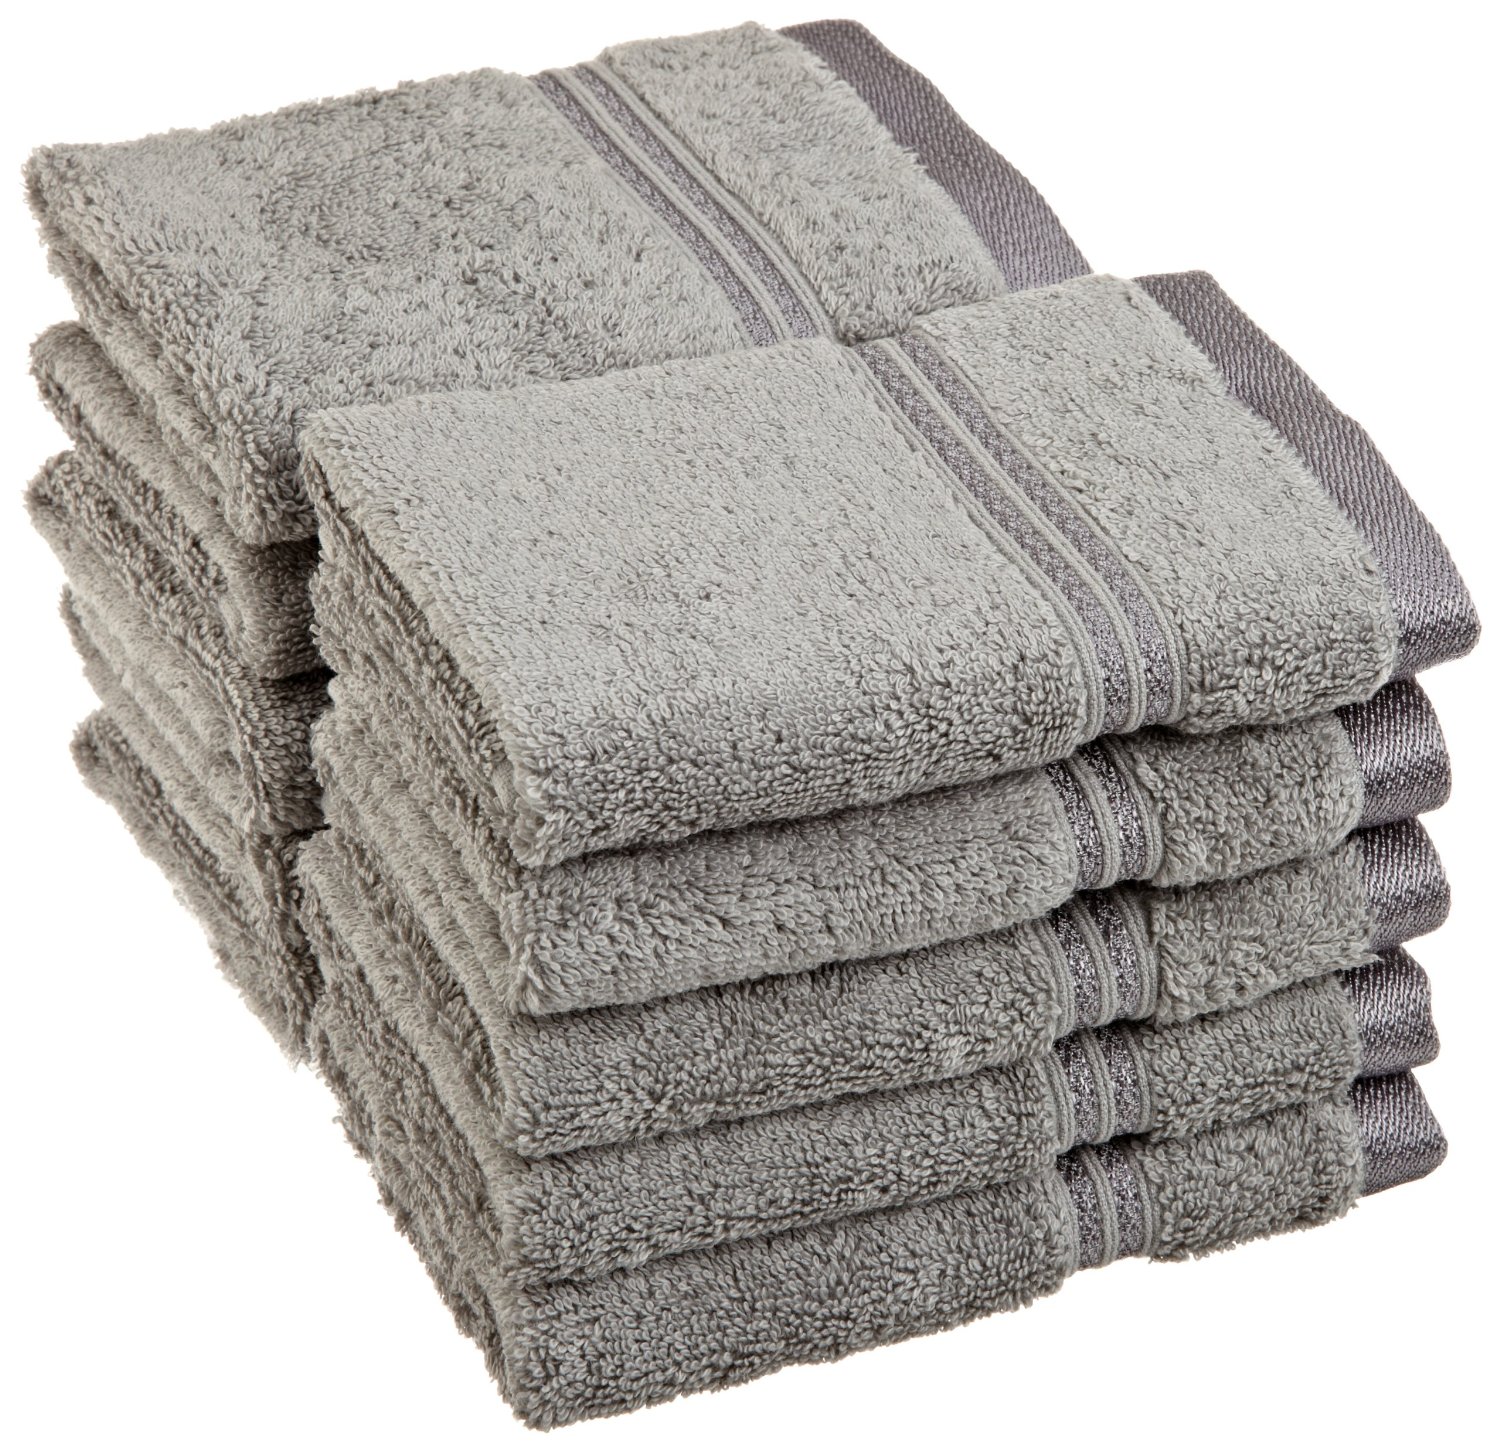 Egyptian Cotton 10PC Face Towels